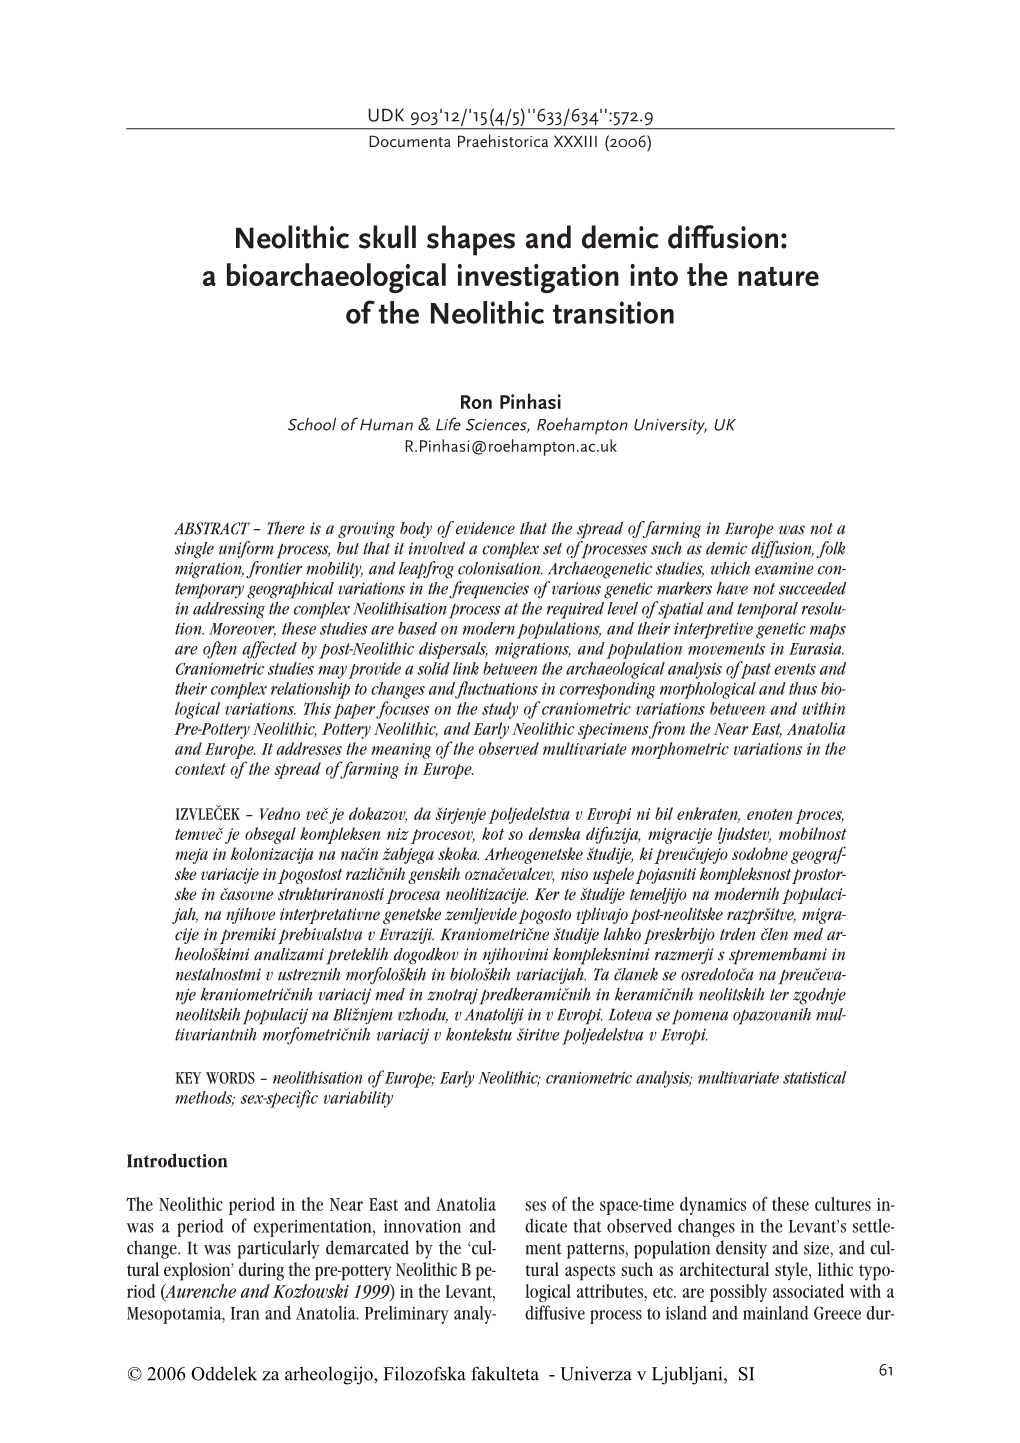 Neolithic Skull Shapes and Demic Diffusion&gt; a Bioarchaeological